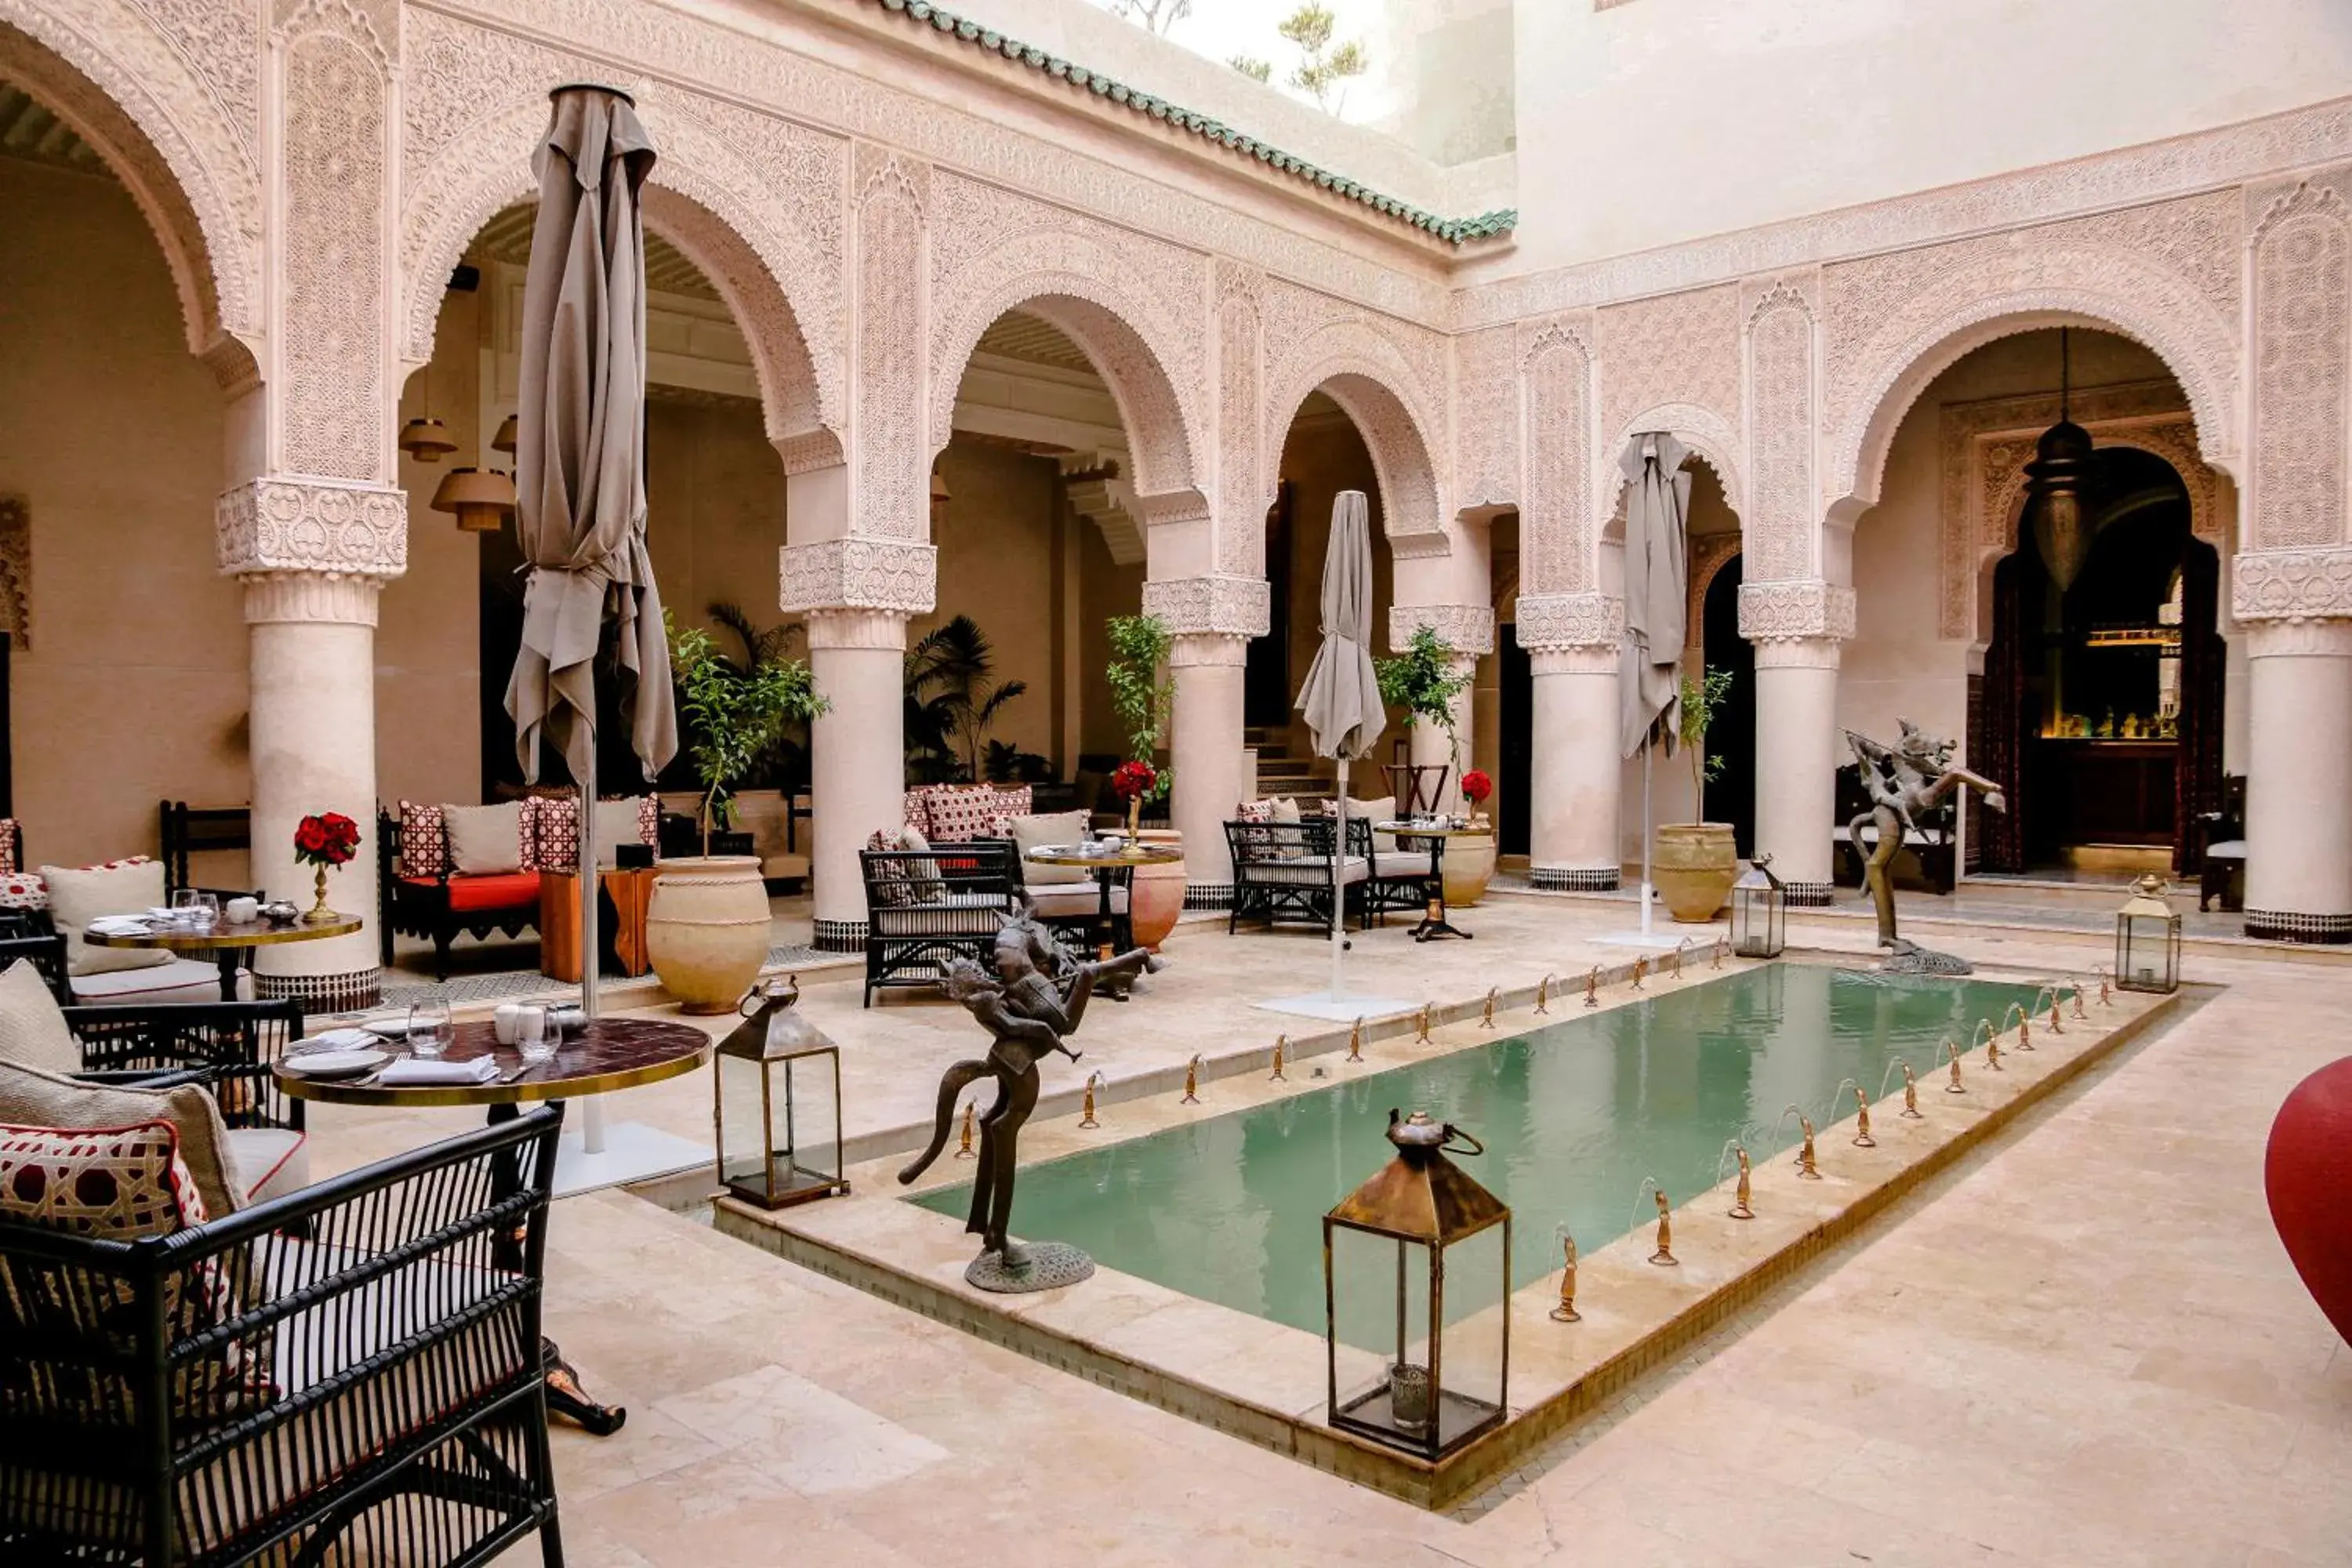 Property building, Swimming Pool in Riad Fes Relais et Cháteaux